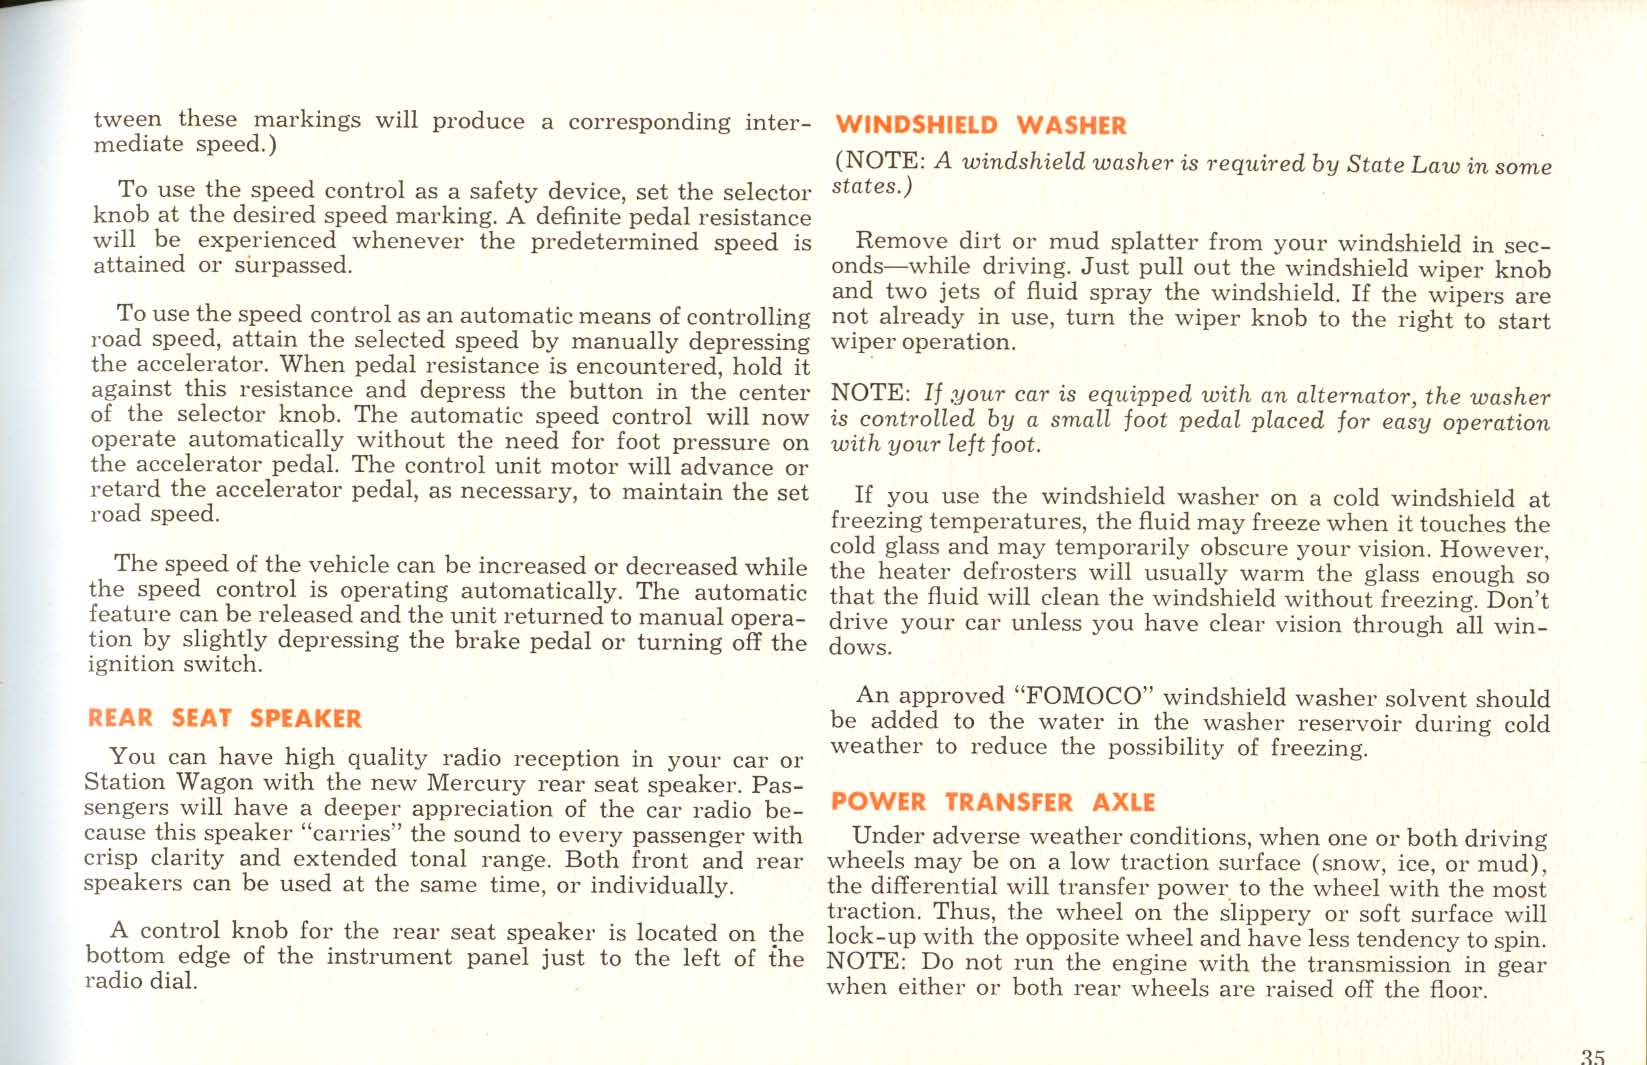 1961 Mercury Owners Manual Page 10